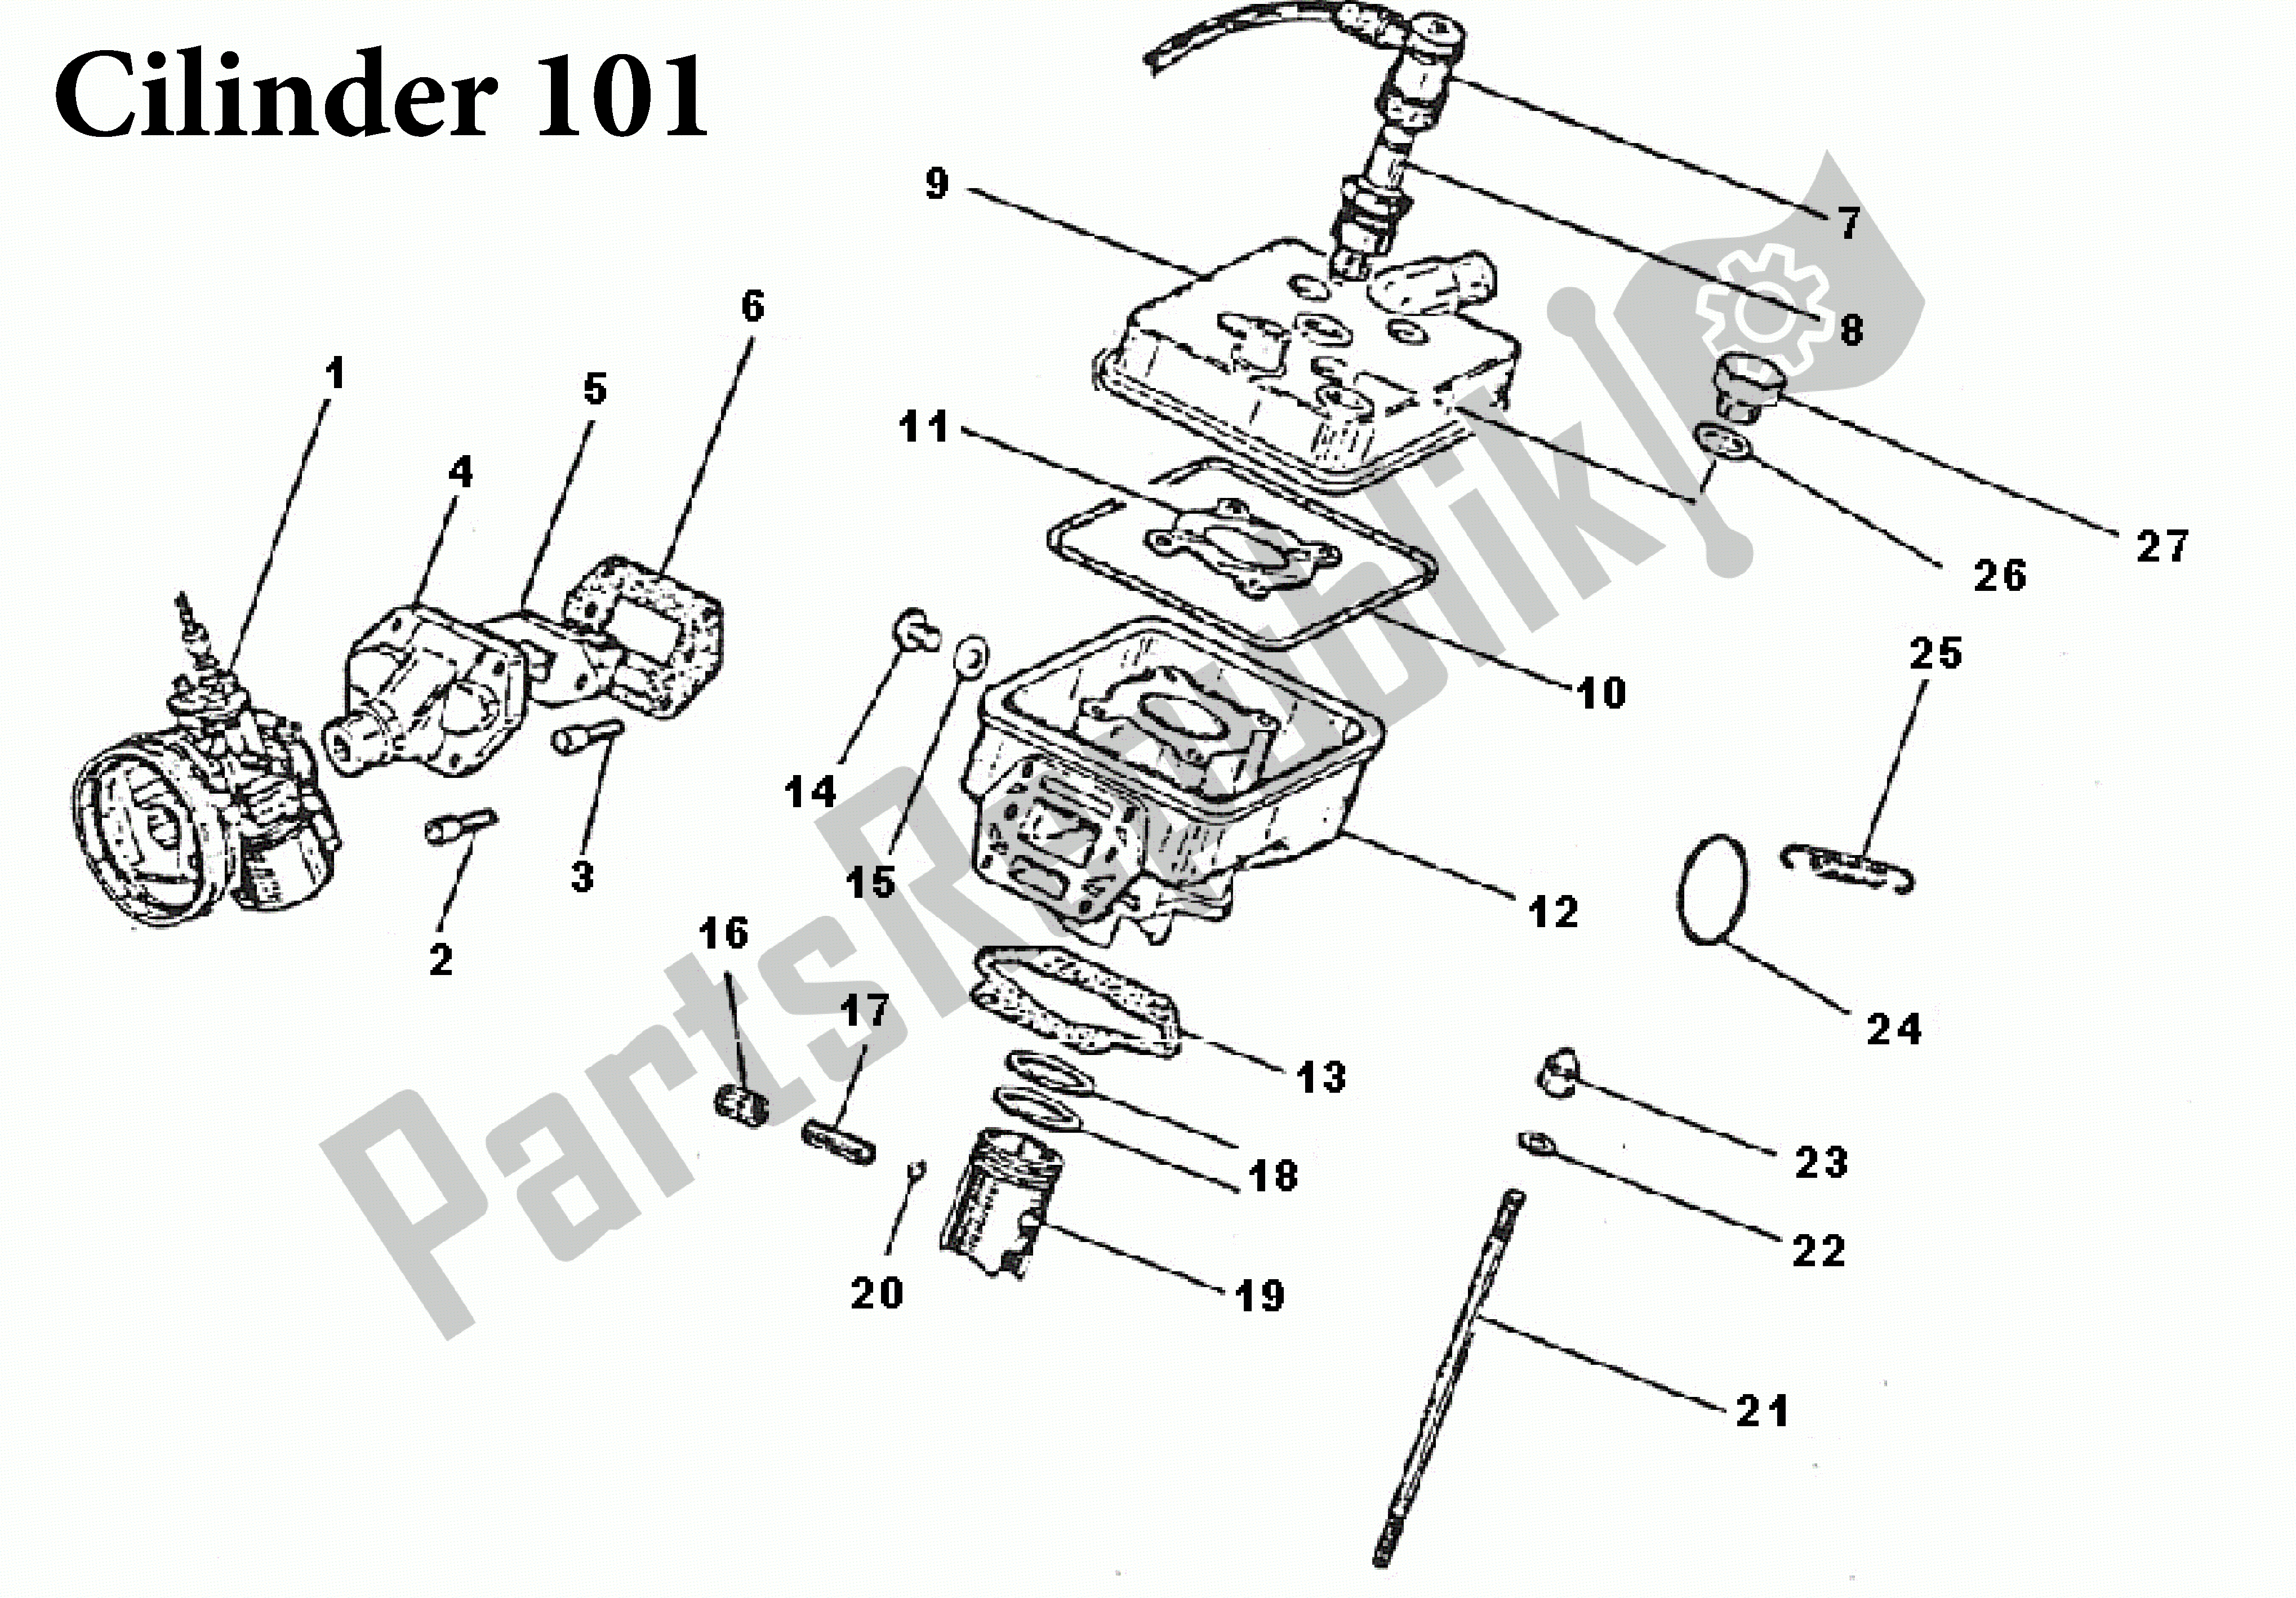 All parts for the Cilinder 101 of the Aprilia ET 50 1987